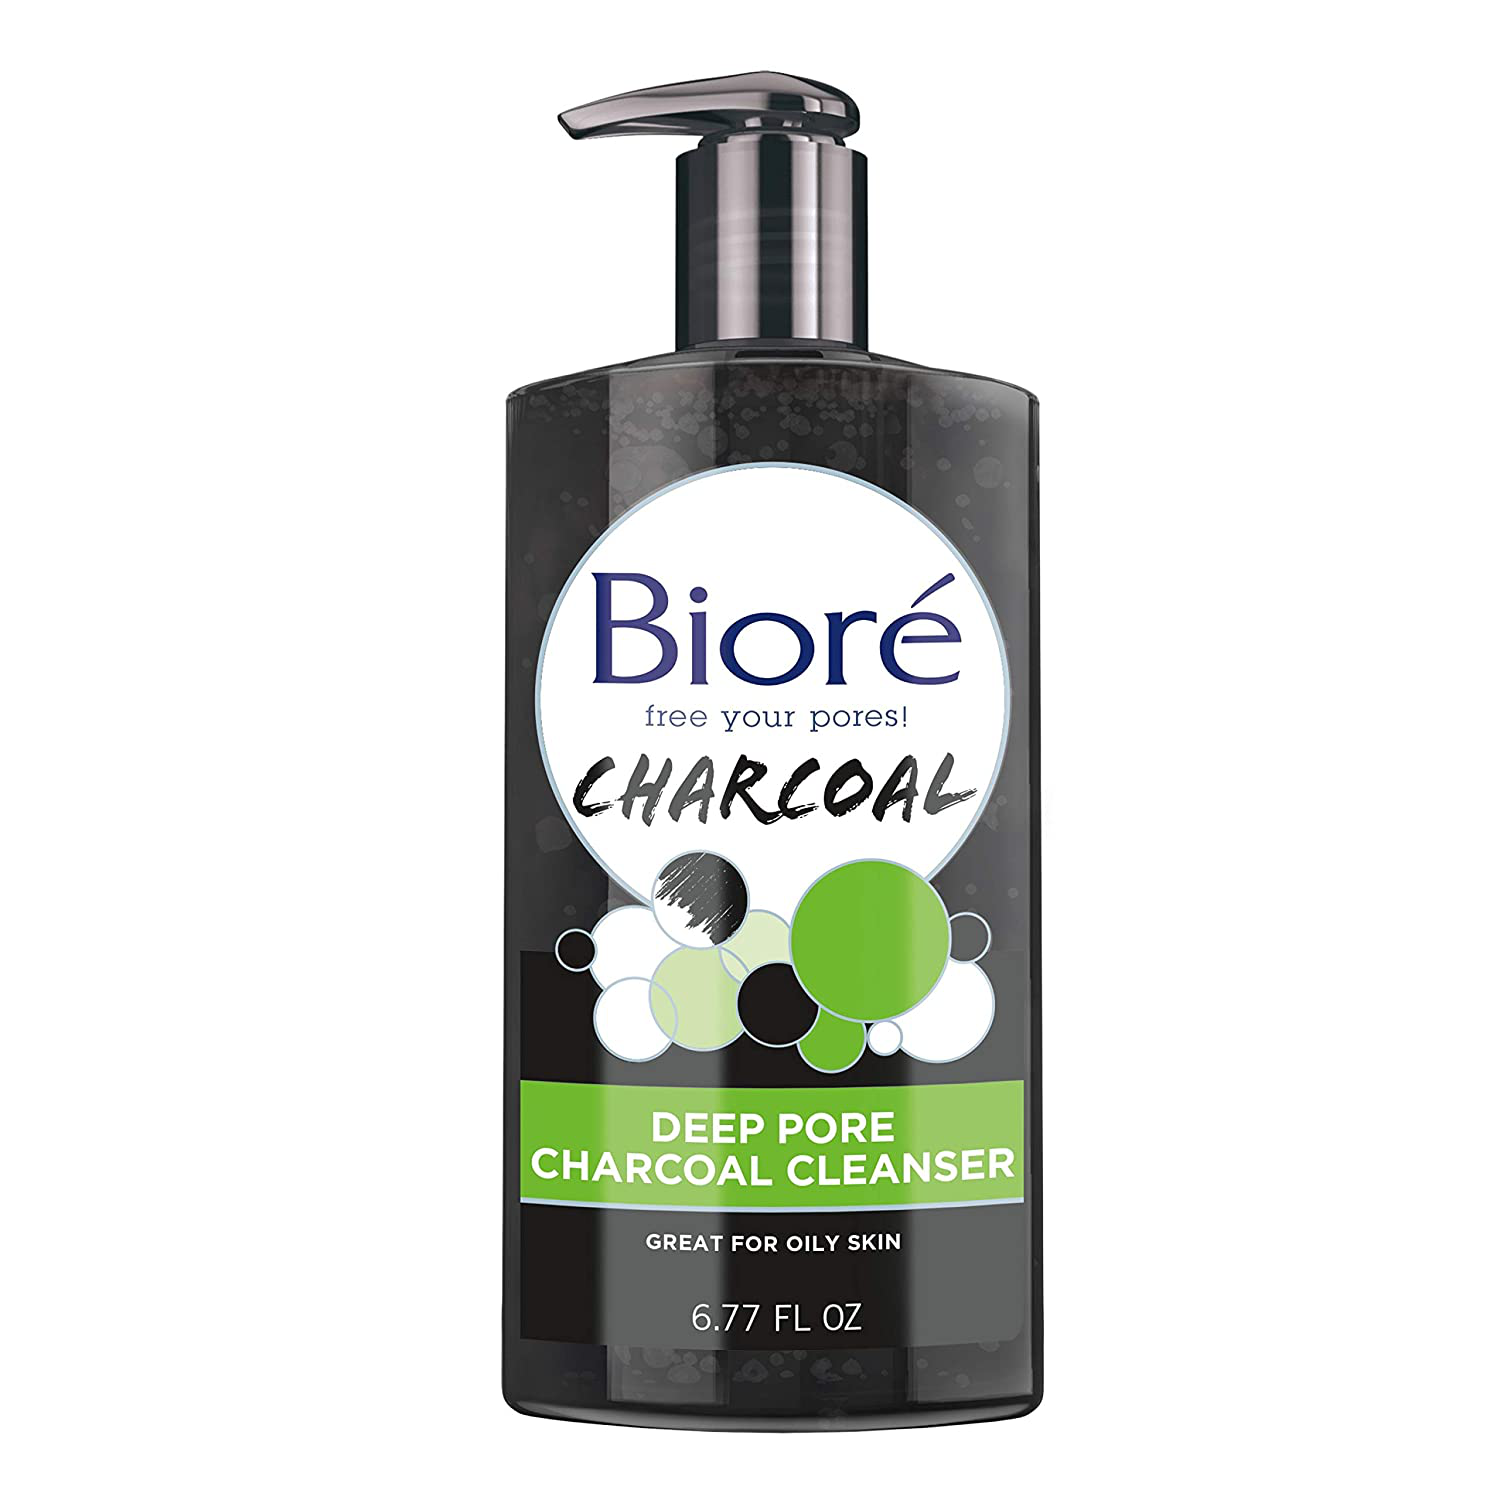 Bioré Deep Pore Charcoal Face Wash, Facial Cleanser for Dirt and Makeup Removal From Oily Skin, 6.77 Ounce